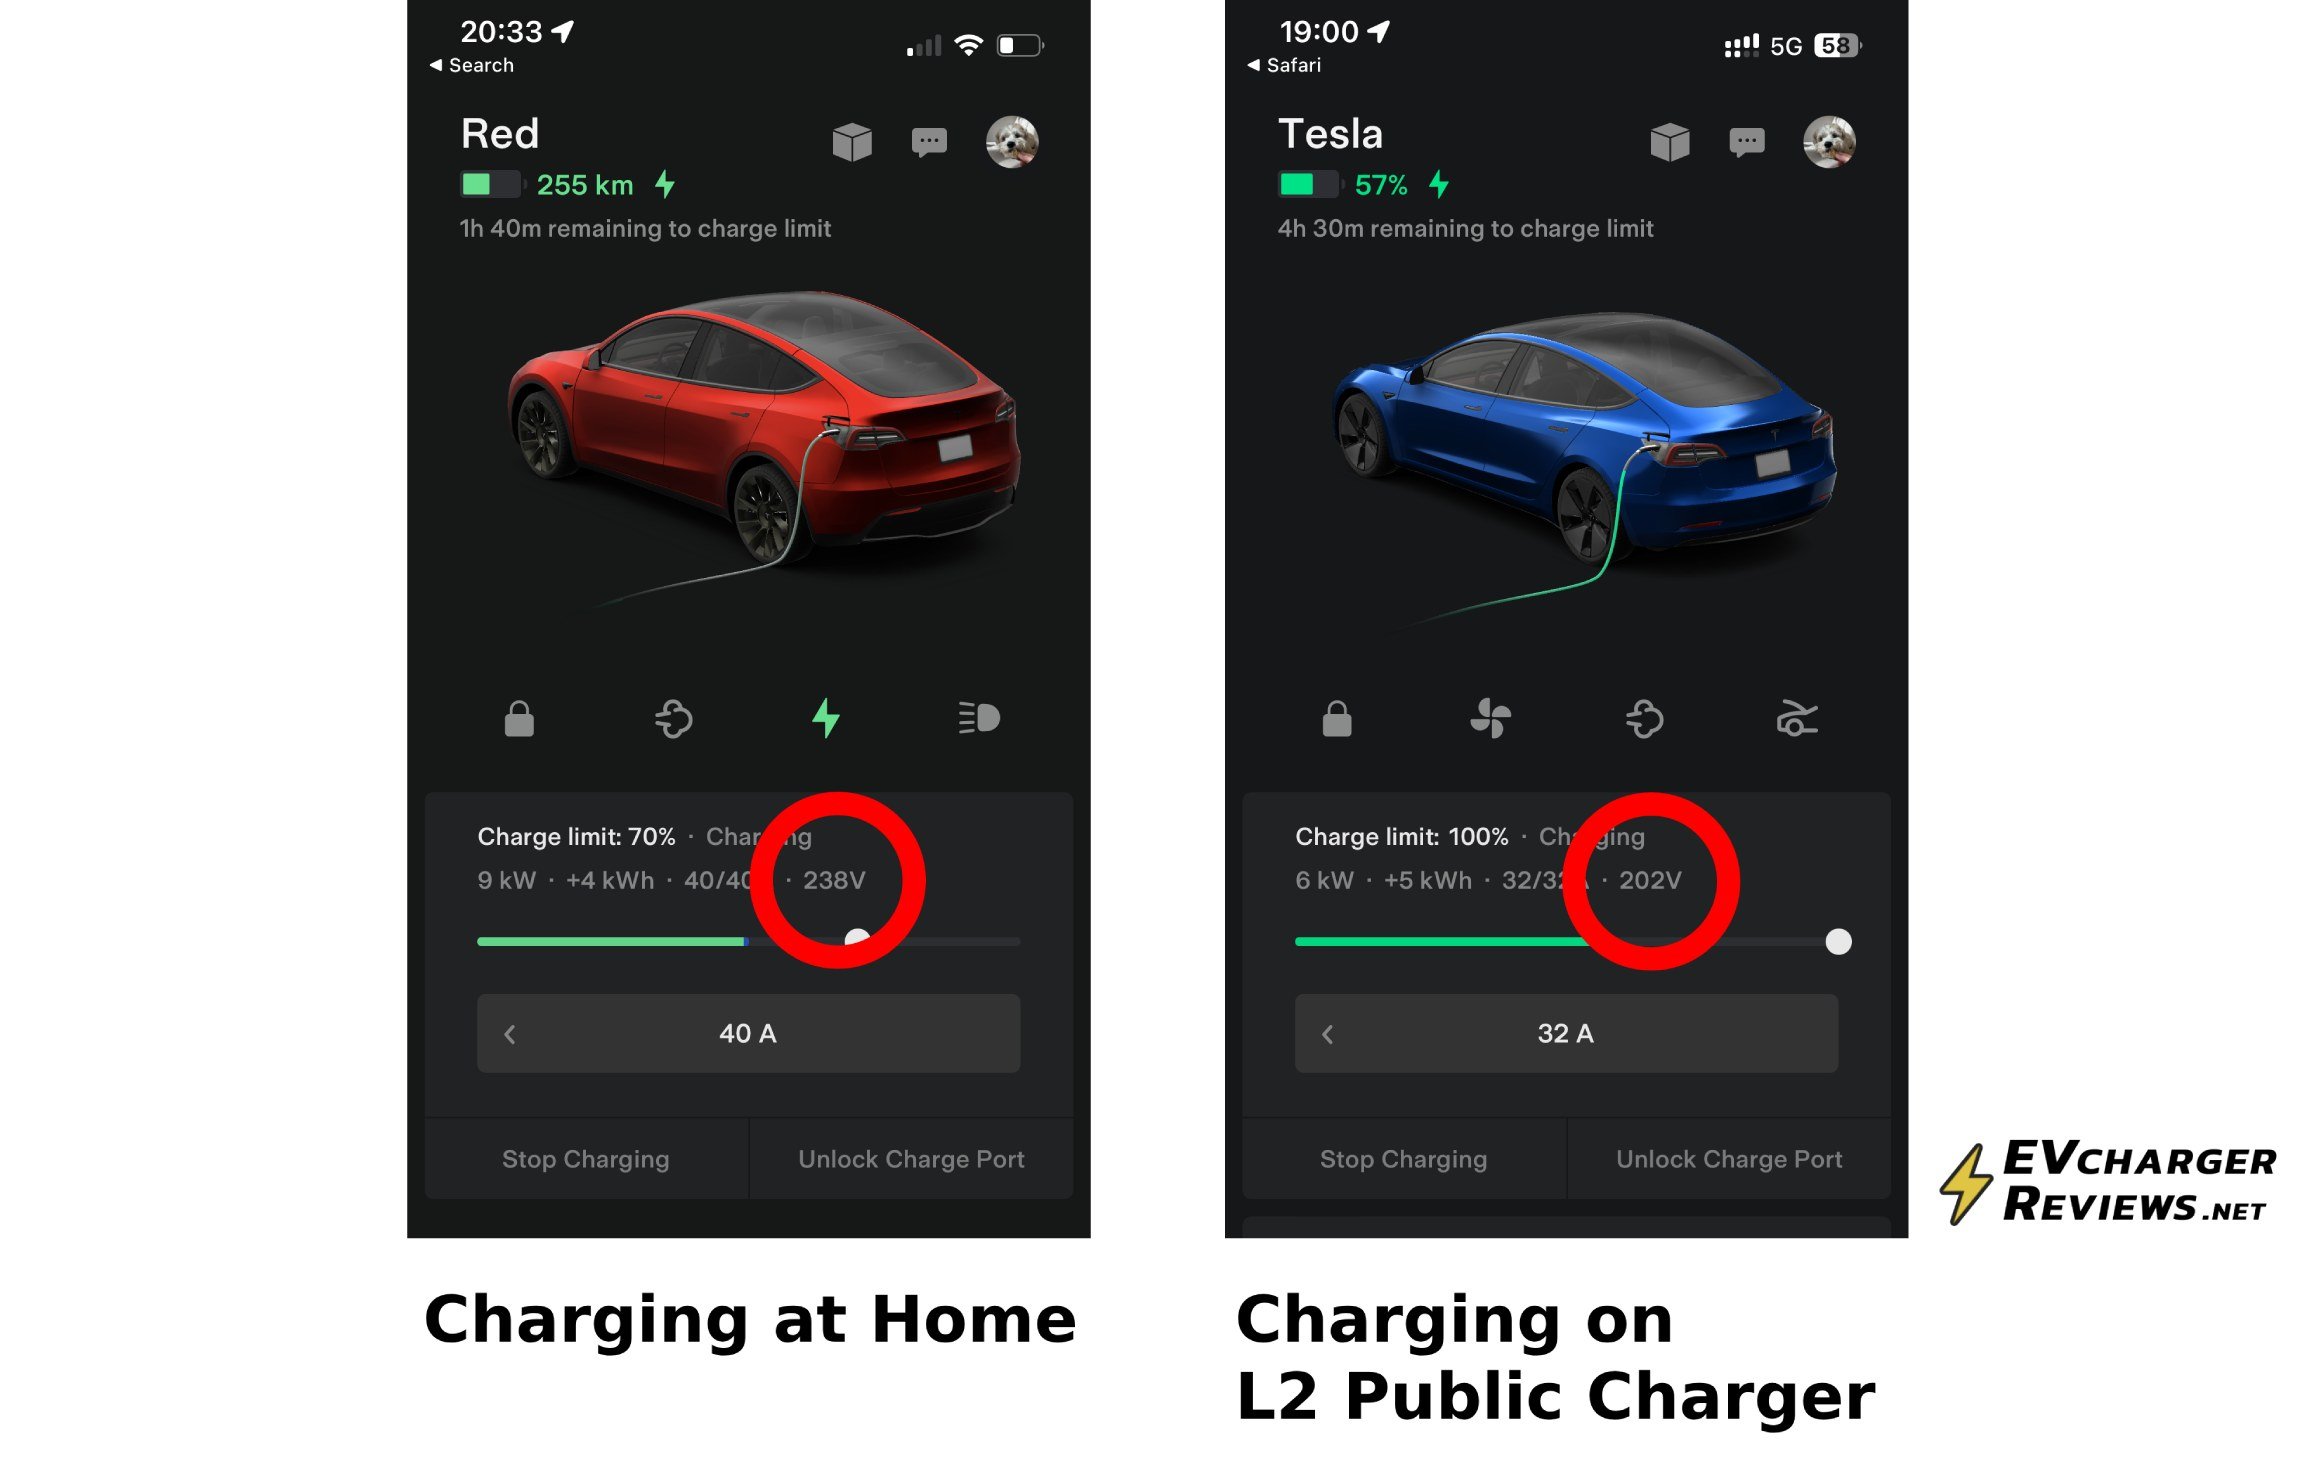 Screenshots demonstrating voltage difference between residential EV charging and public EV charging. 